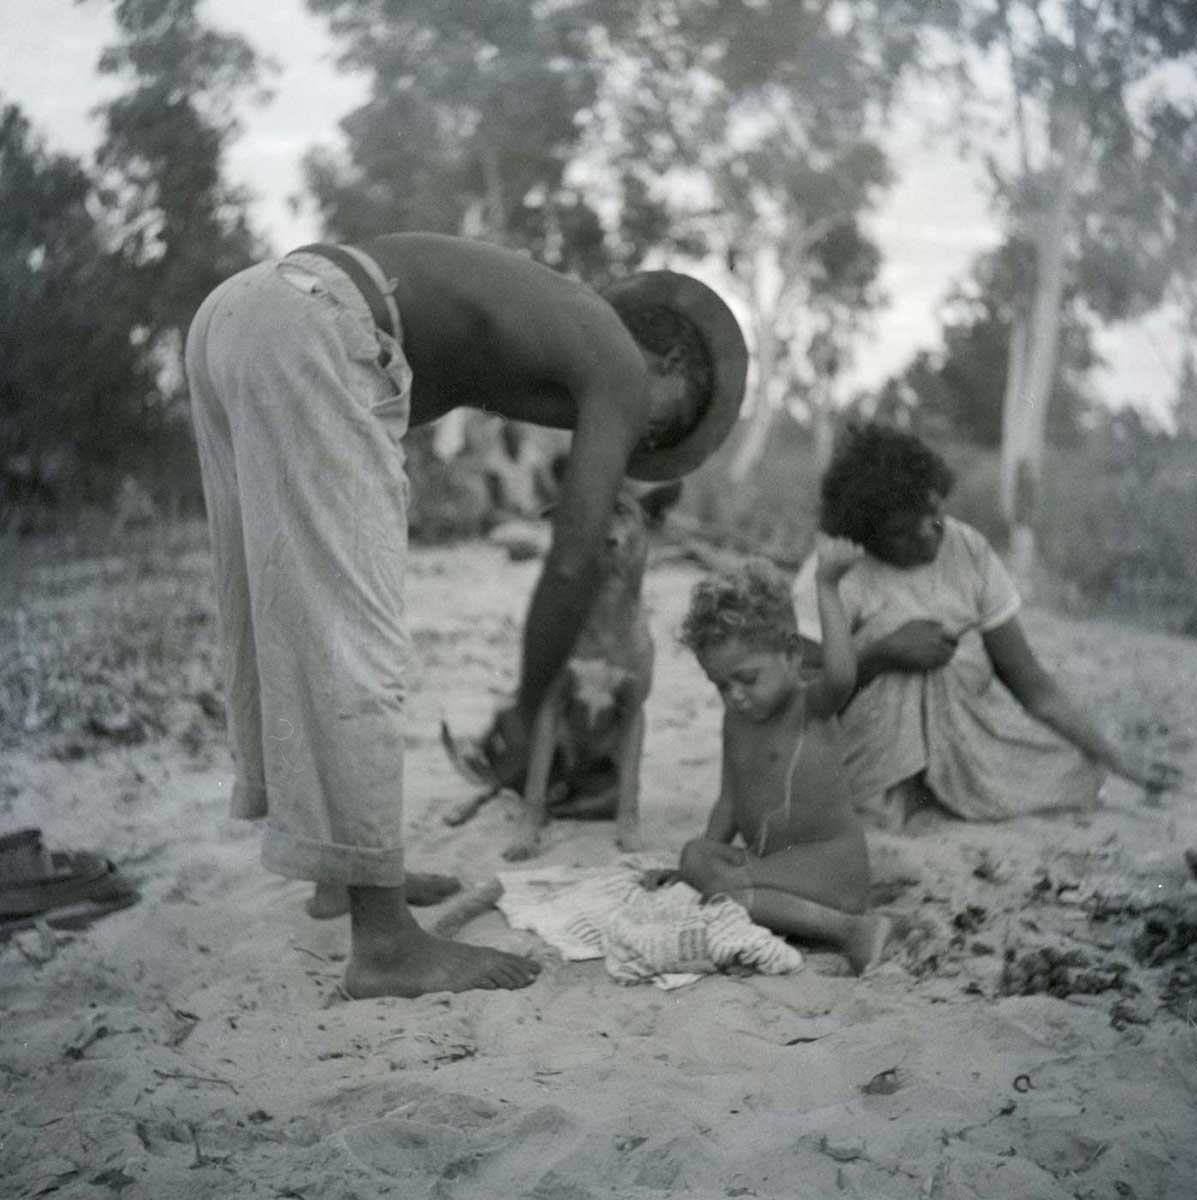 A black and white photographic negative that depicts an Aboriginal man wearing a hat bending over next to a child with a woman and dog sitting in the background. - click to view larger image